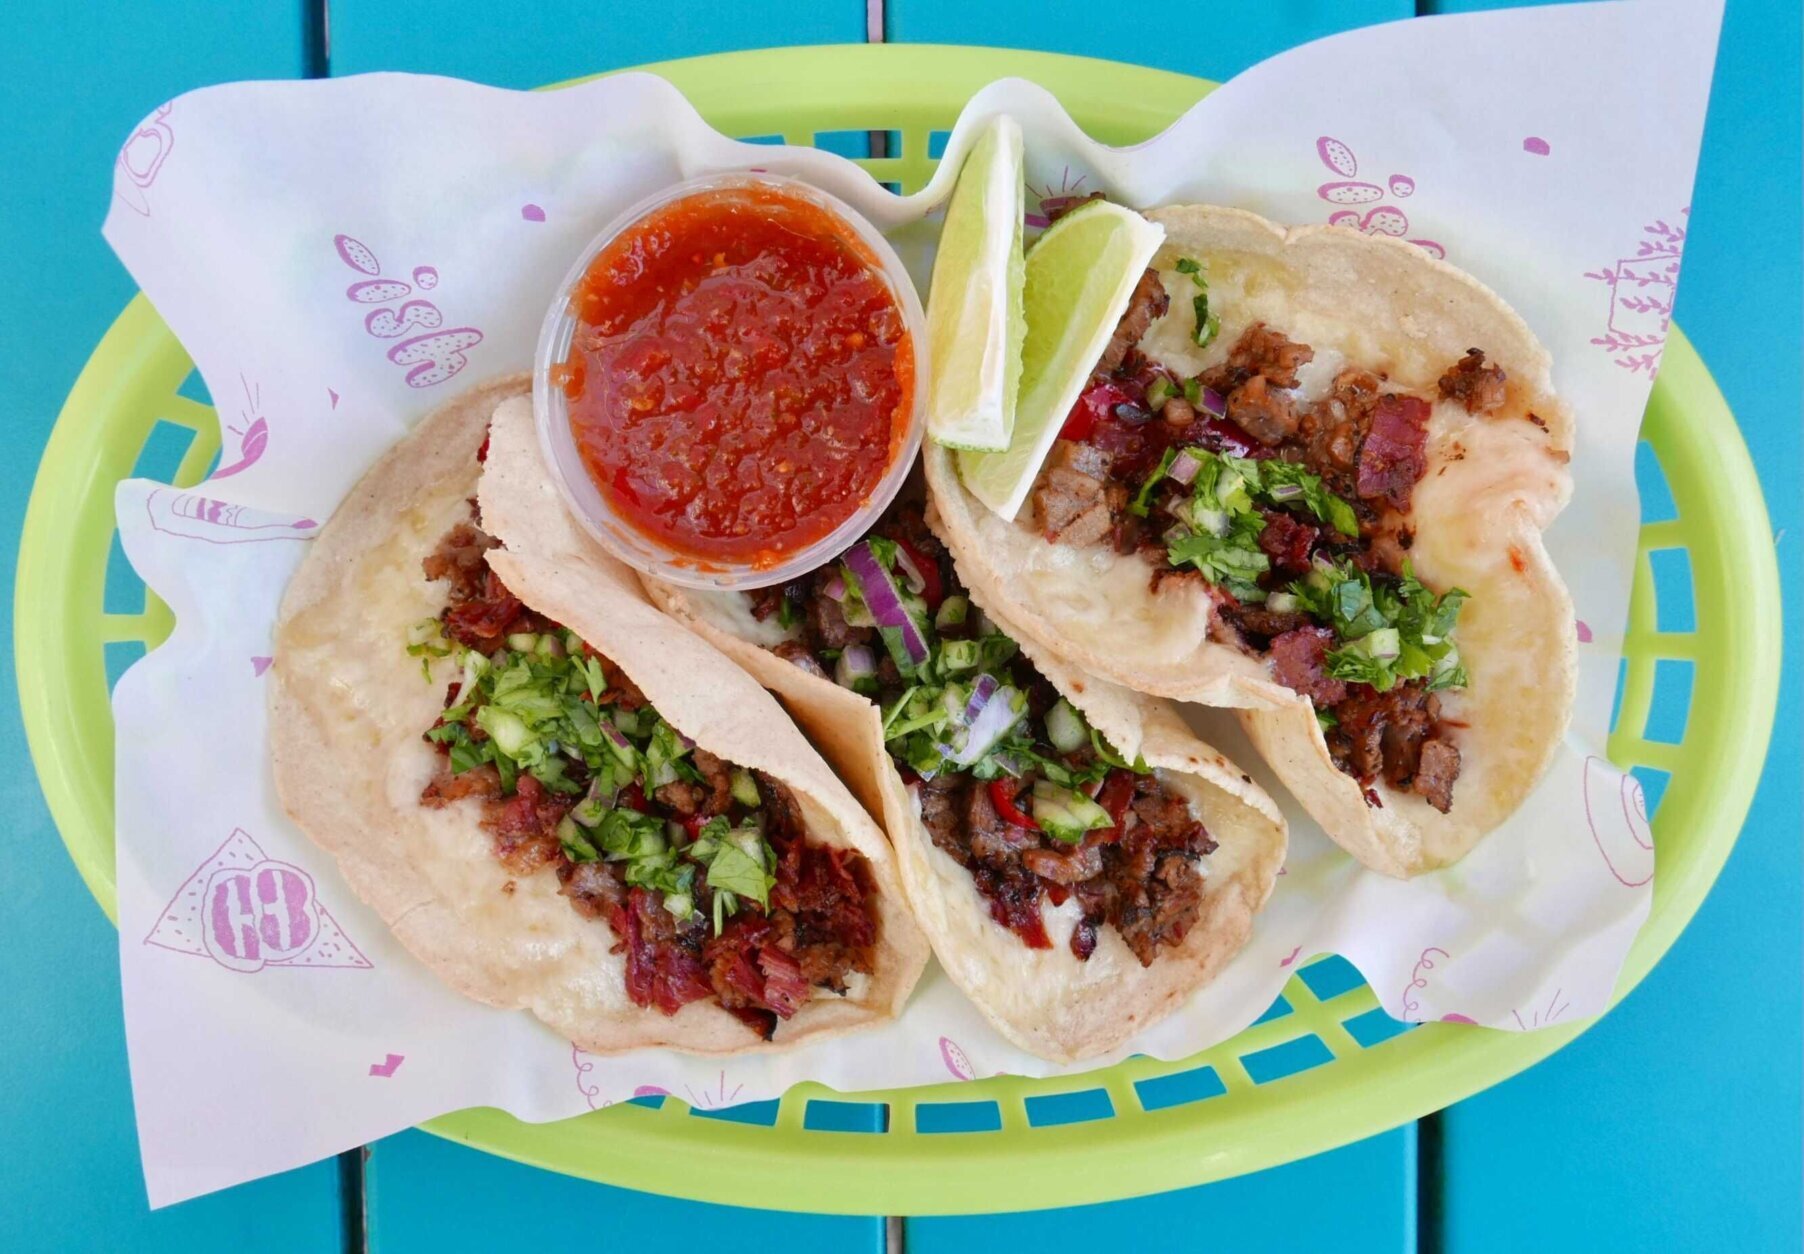 <p>Pastrami tacos with housemade corn tortillas are on the menu at Call Your Mother.</p>
